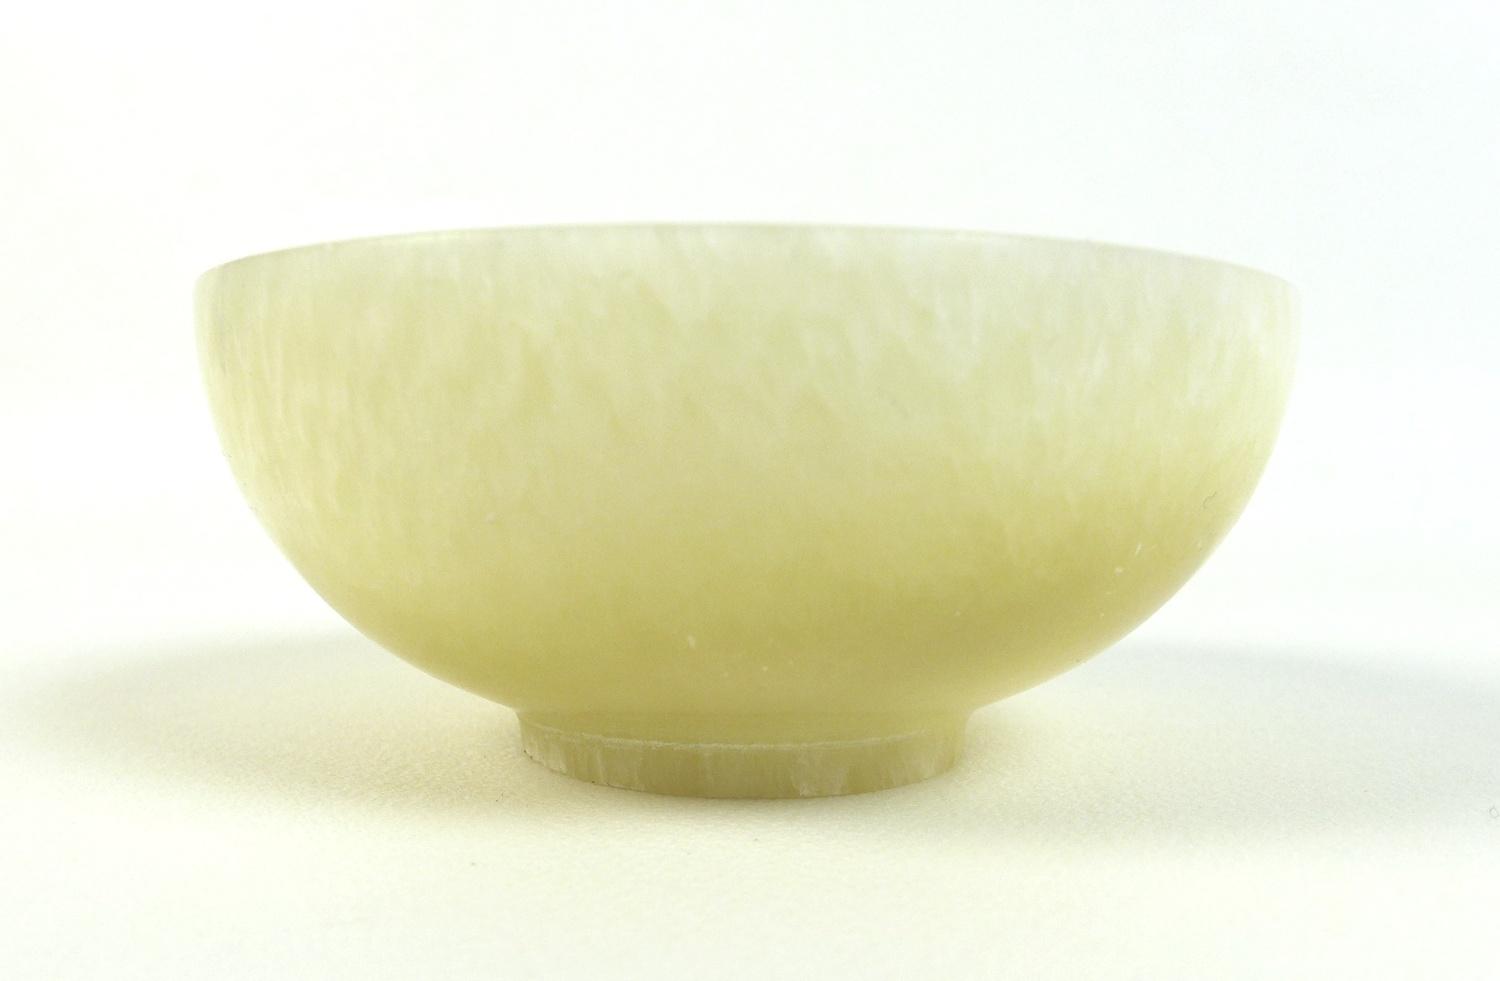 A Chinese mutton fat jade bowl, 11 by 4.5cm, together with a pale green and white jade bangle, 6cm - Image 3 of 7